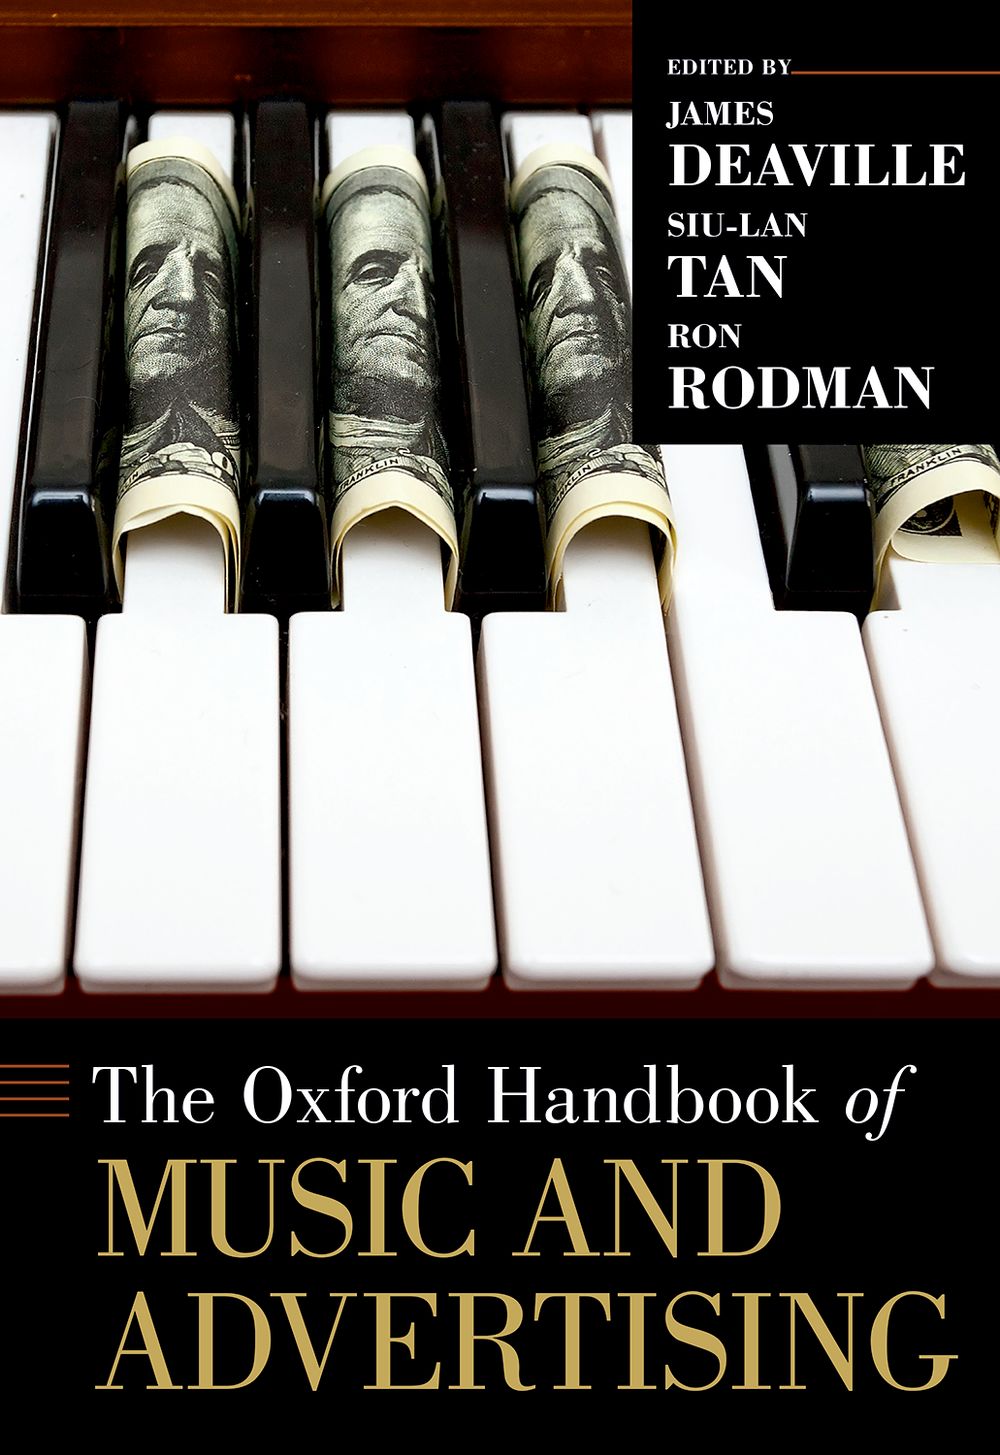 The Oxford Handbook of Music and Advertising: Reference